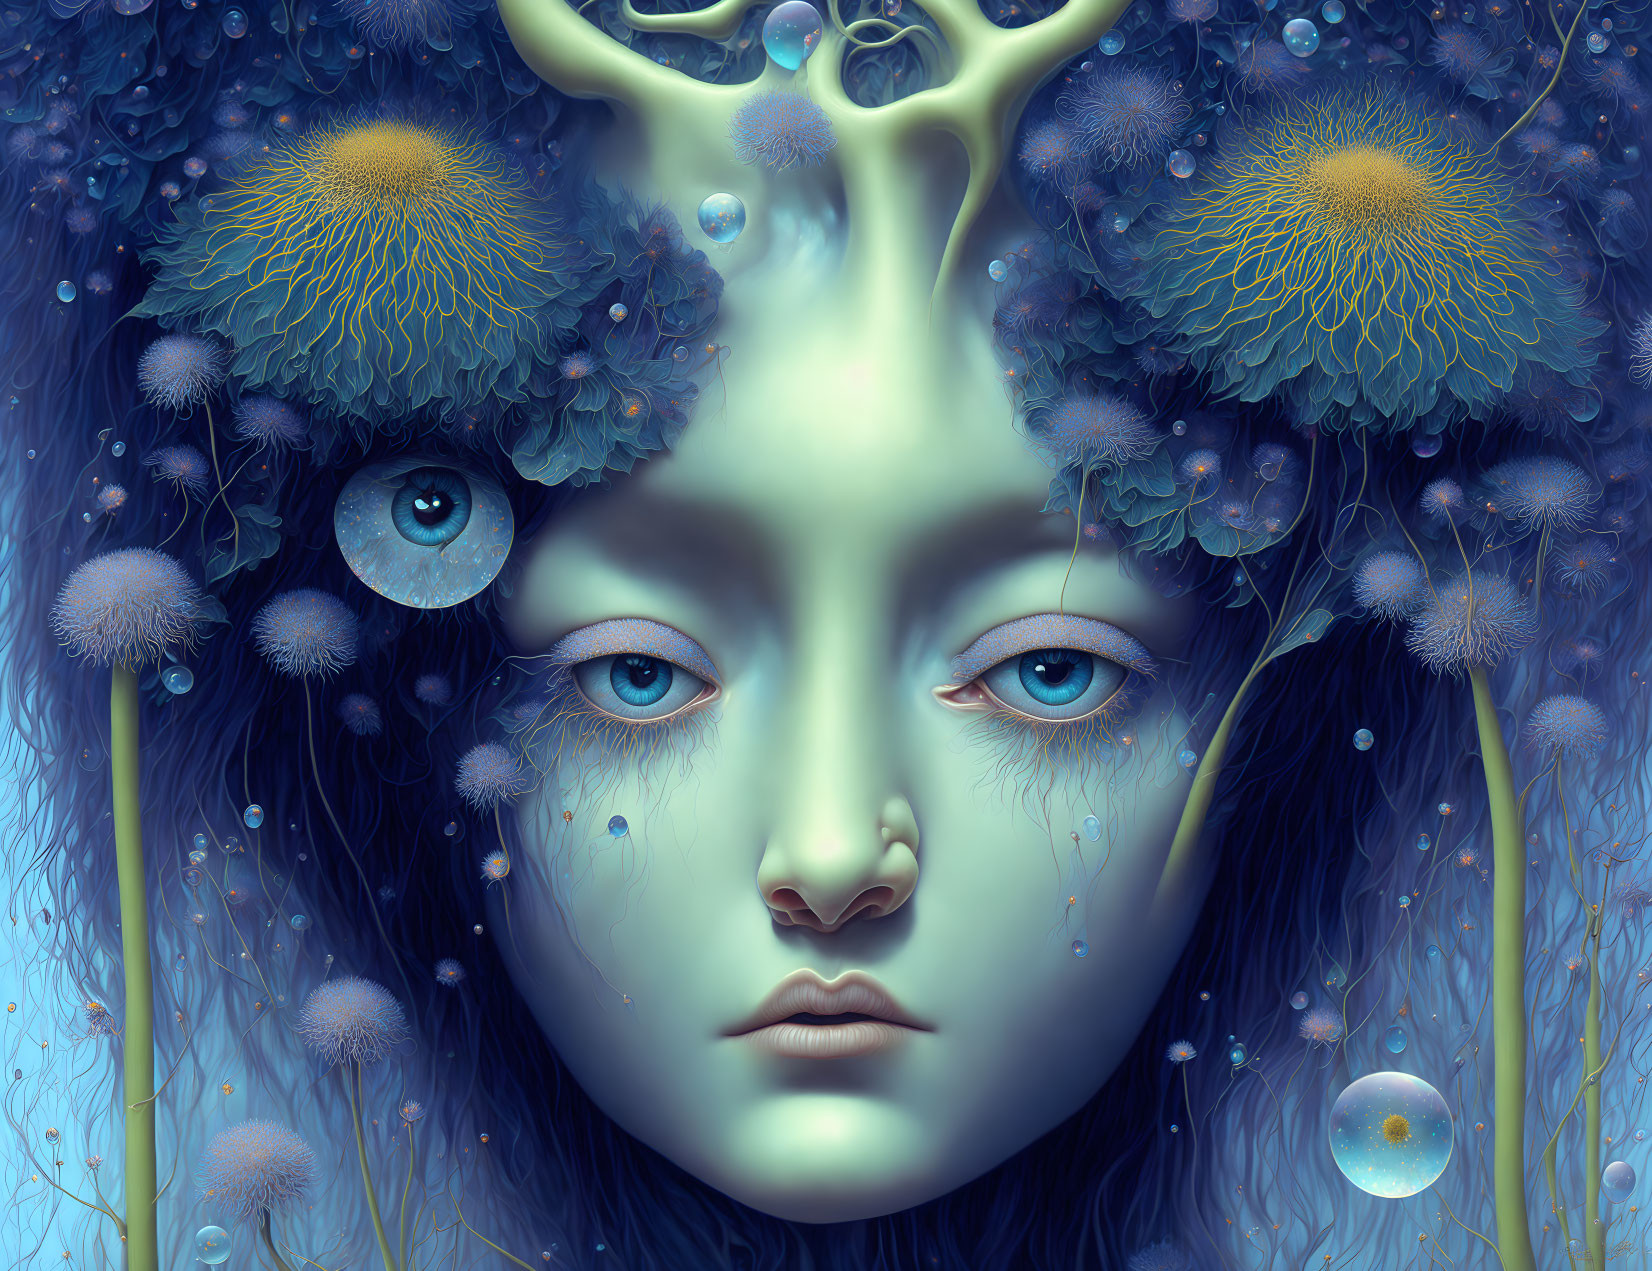 Surreal portrait featuring blue-eyed face amidst fantastical flora and ethereal blue orbs